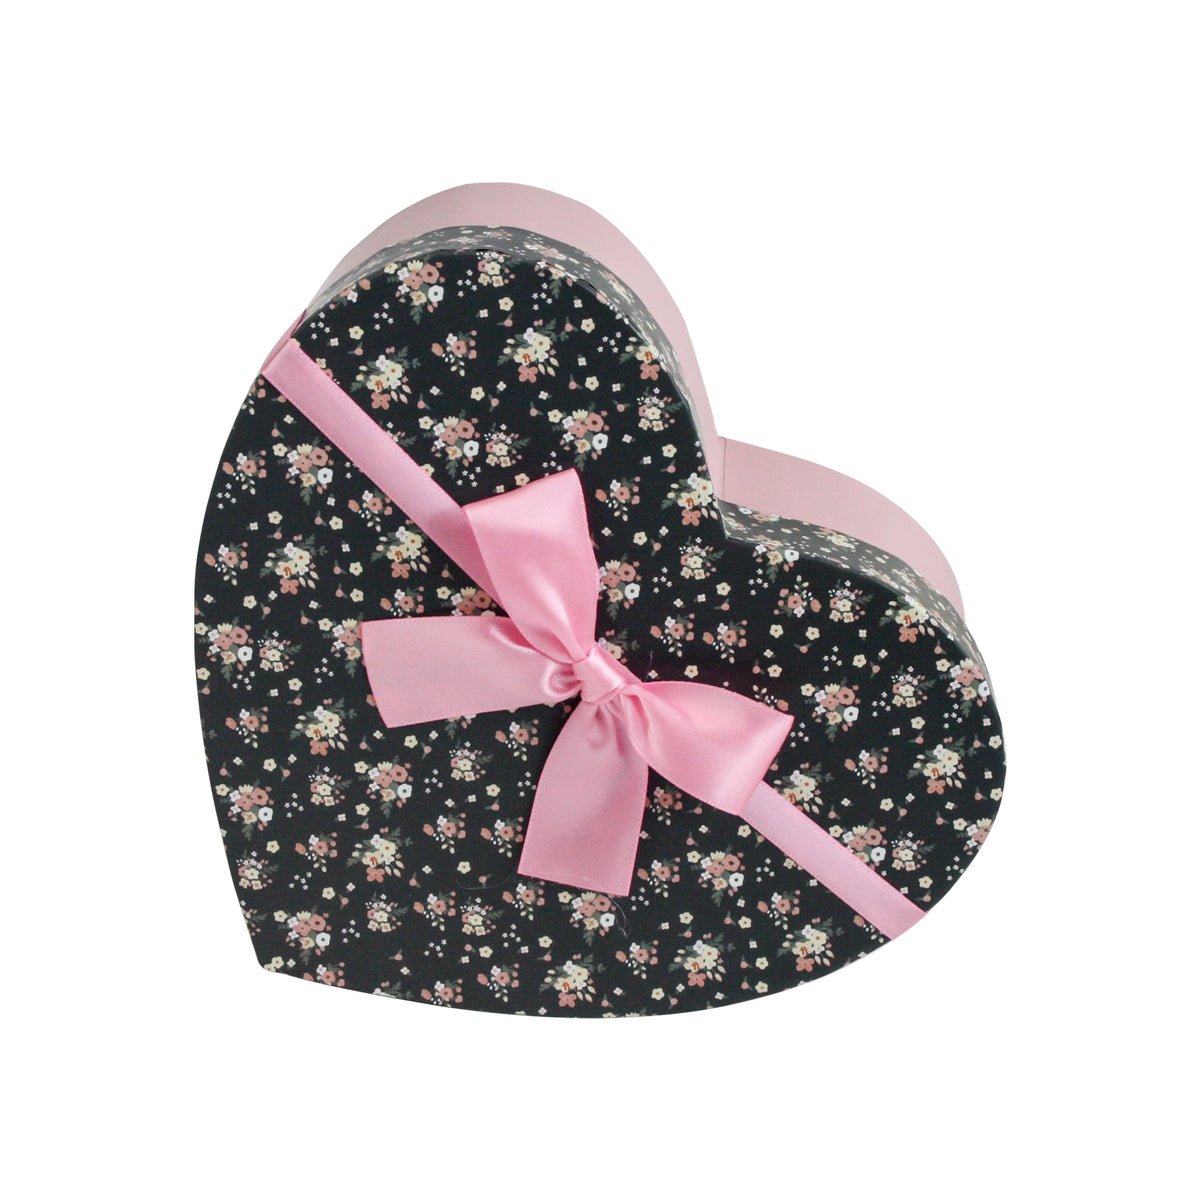 Luxury Heart Shaped Pink Floral Gift Box - Single